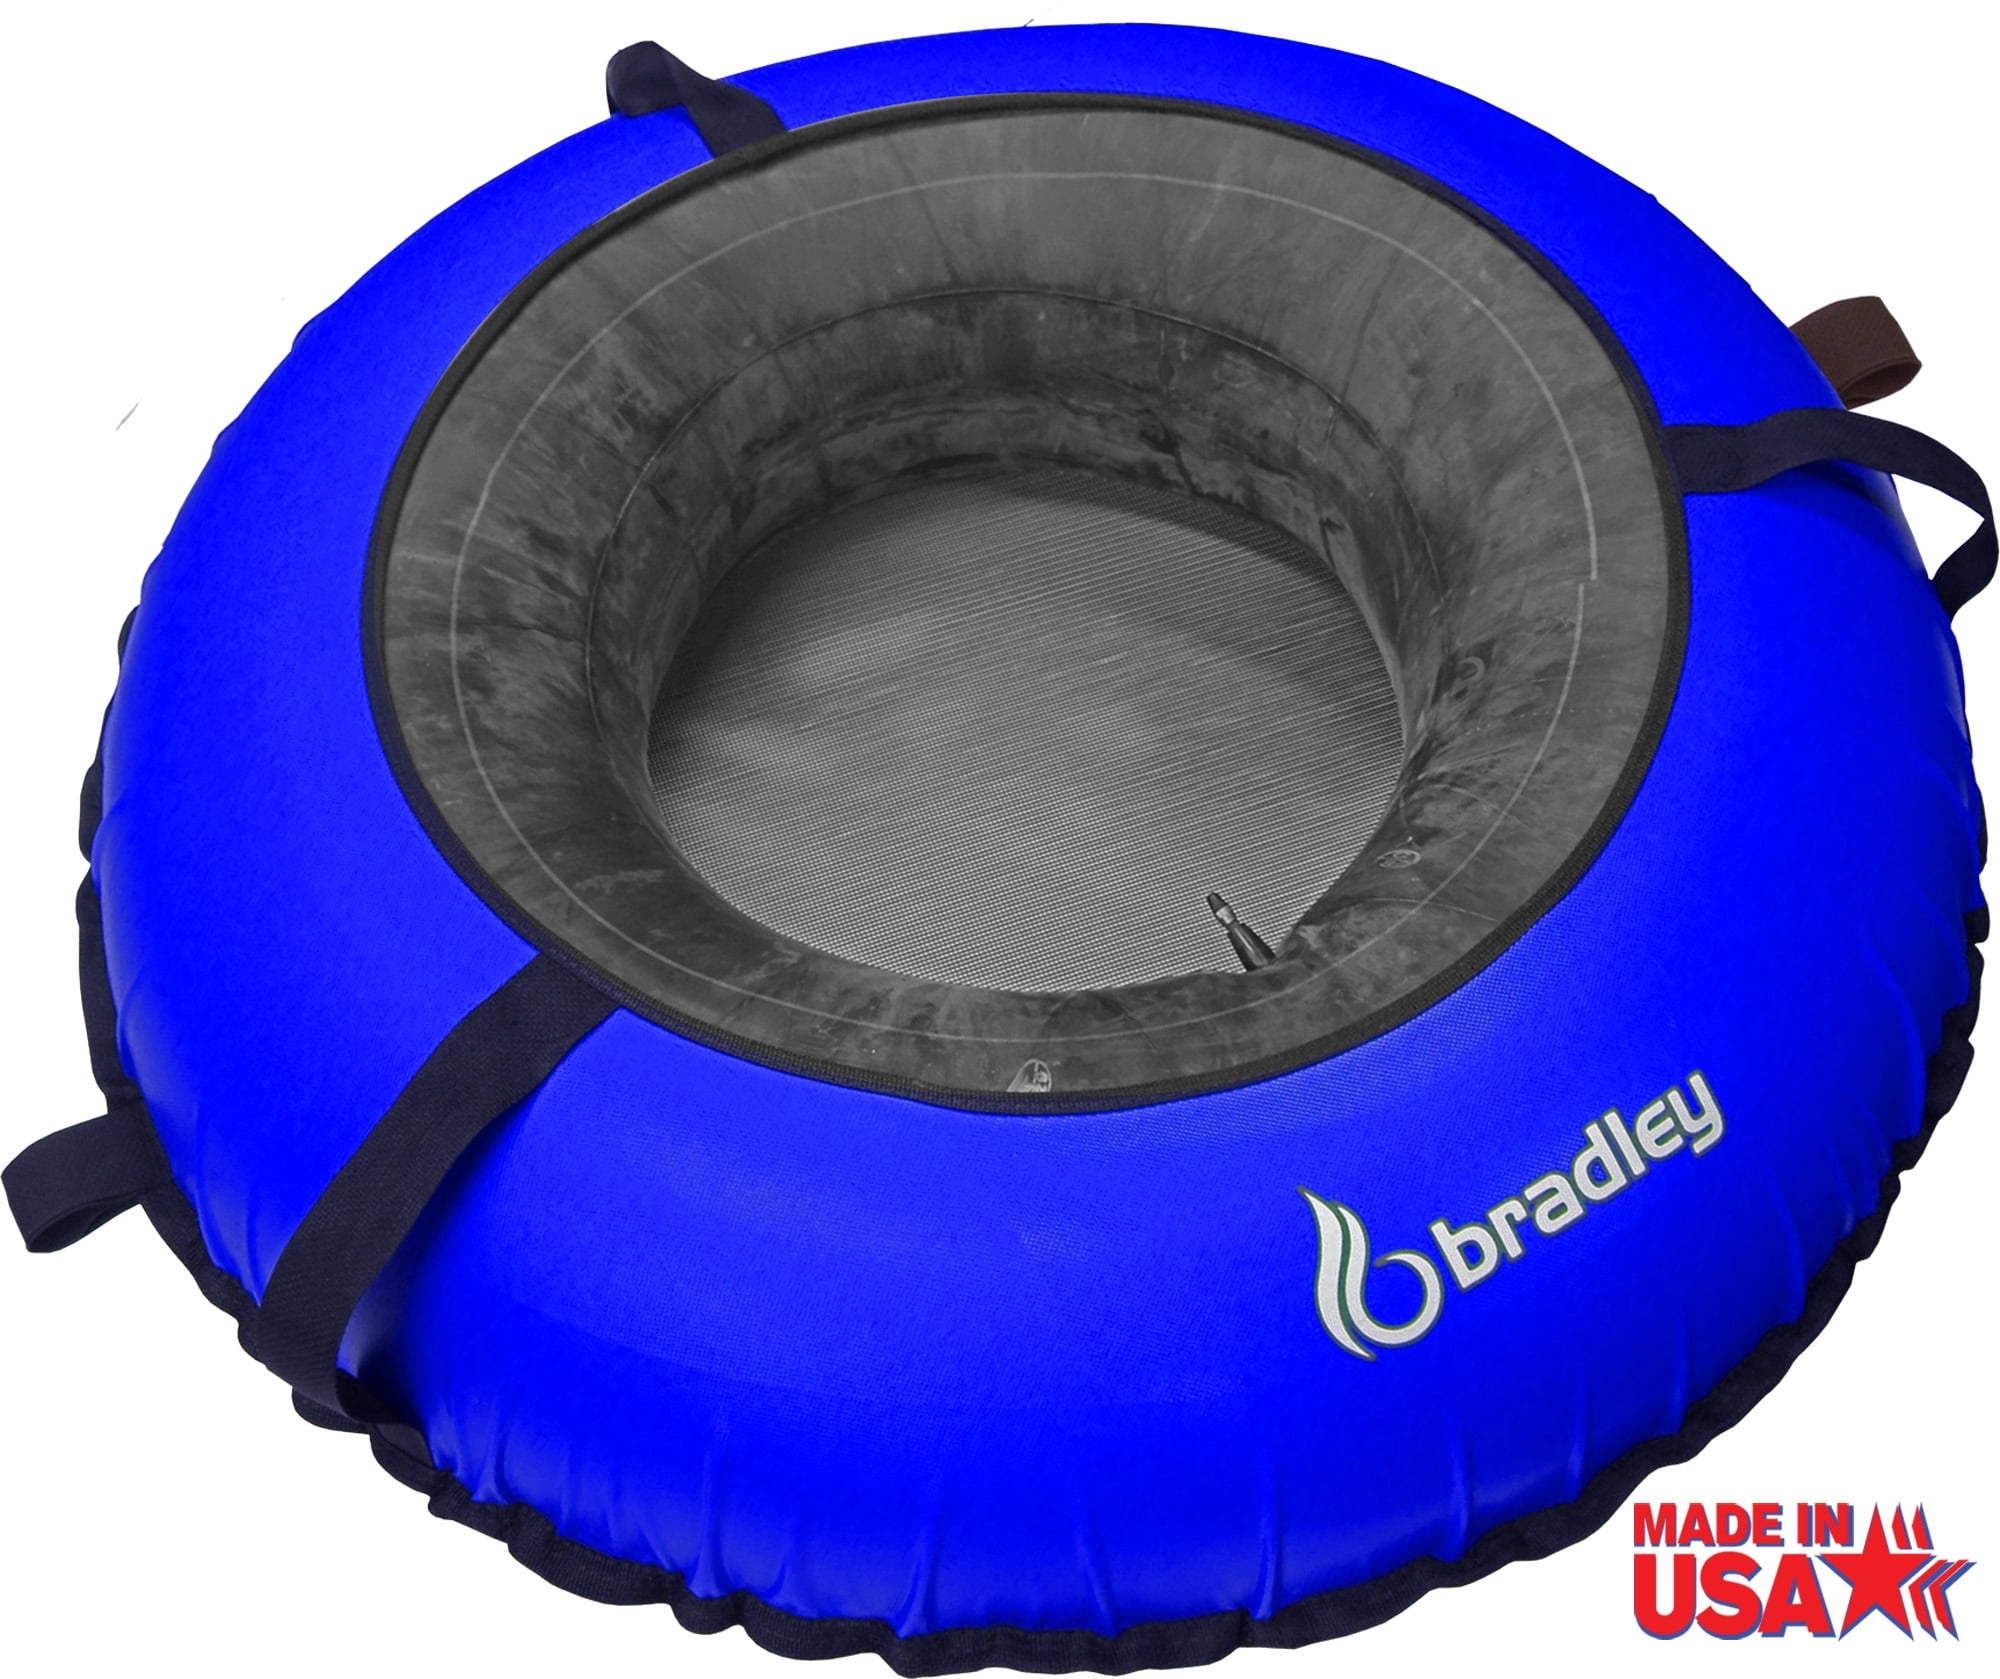 Pack of Two Bradley Heavy Duty Tubes for Floating The River; Whitewater Water Tube; Rubber Inner Tube with Cover for River Floating; Linking Tandem